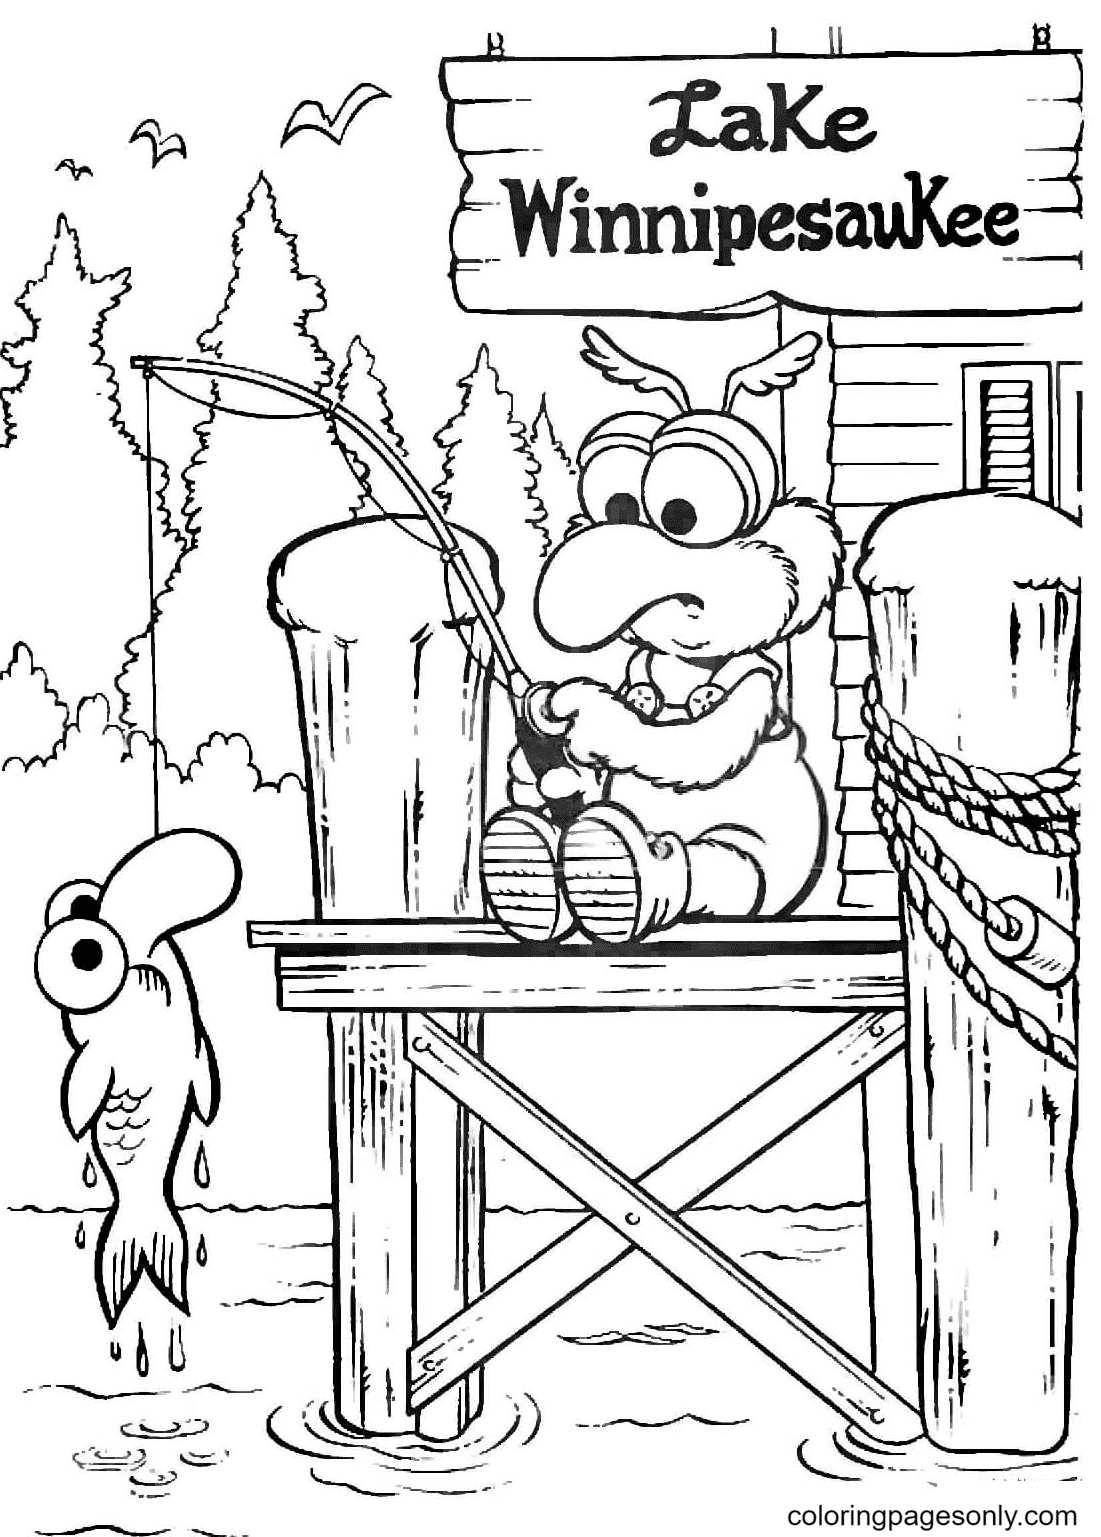 Gonzo Is Fishing on Lake WinnipesauKee Coloring Pages